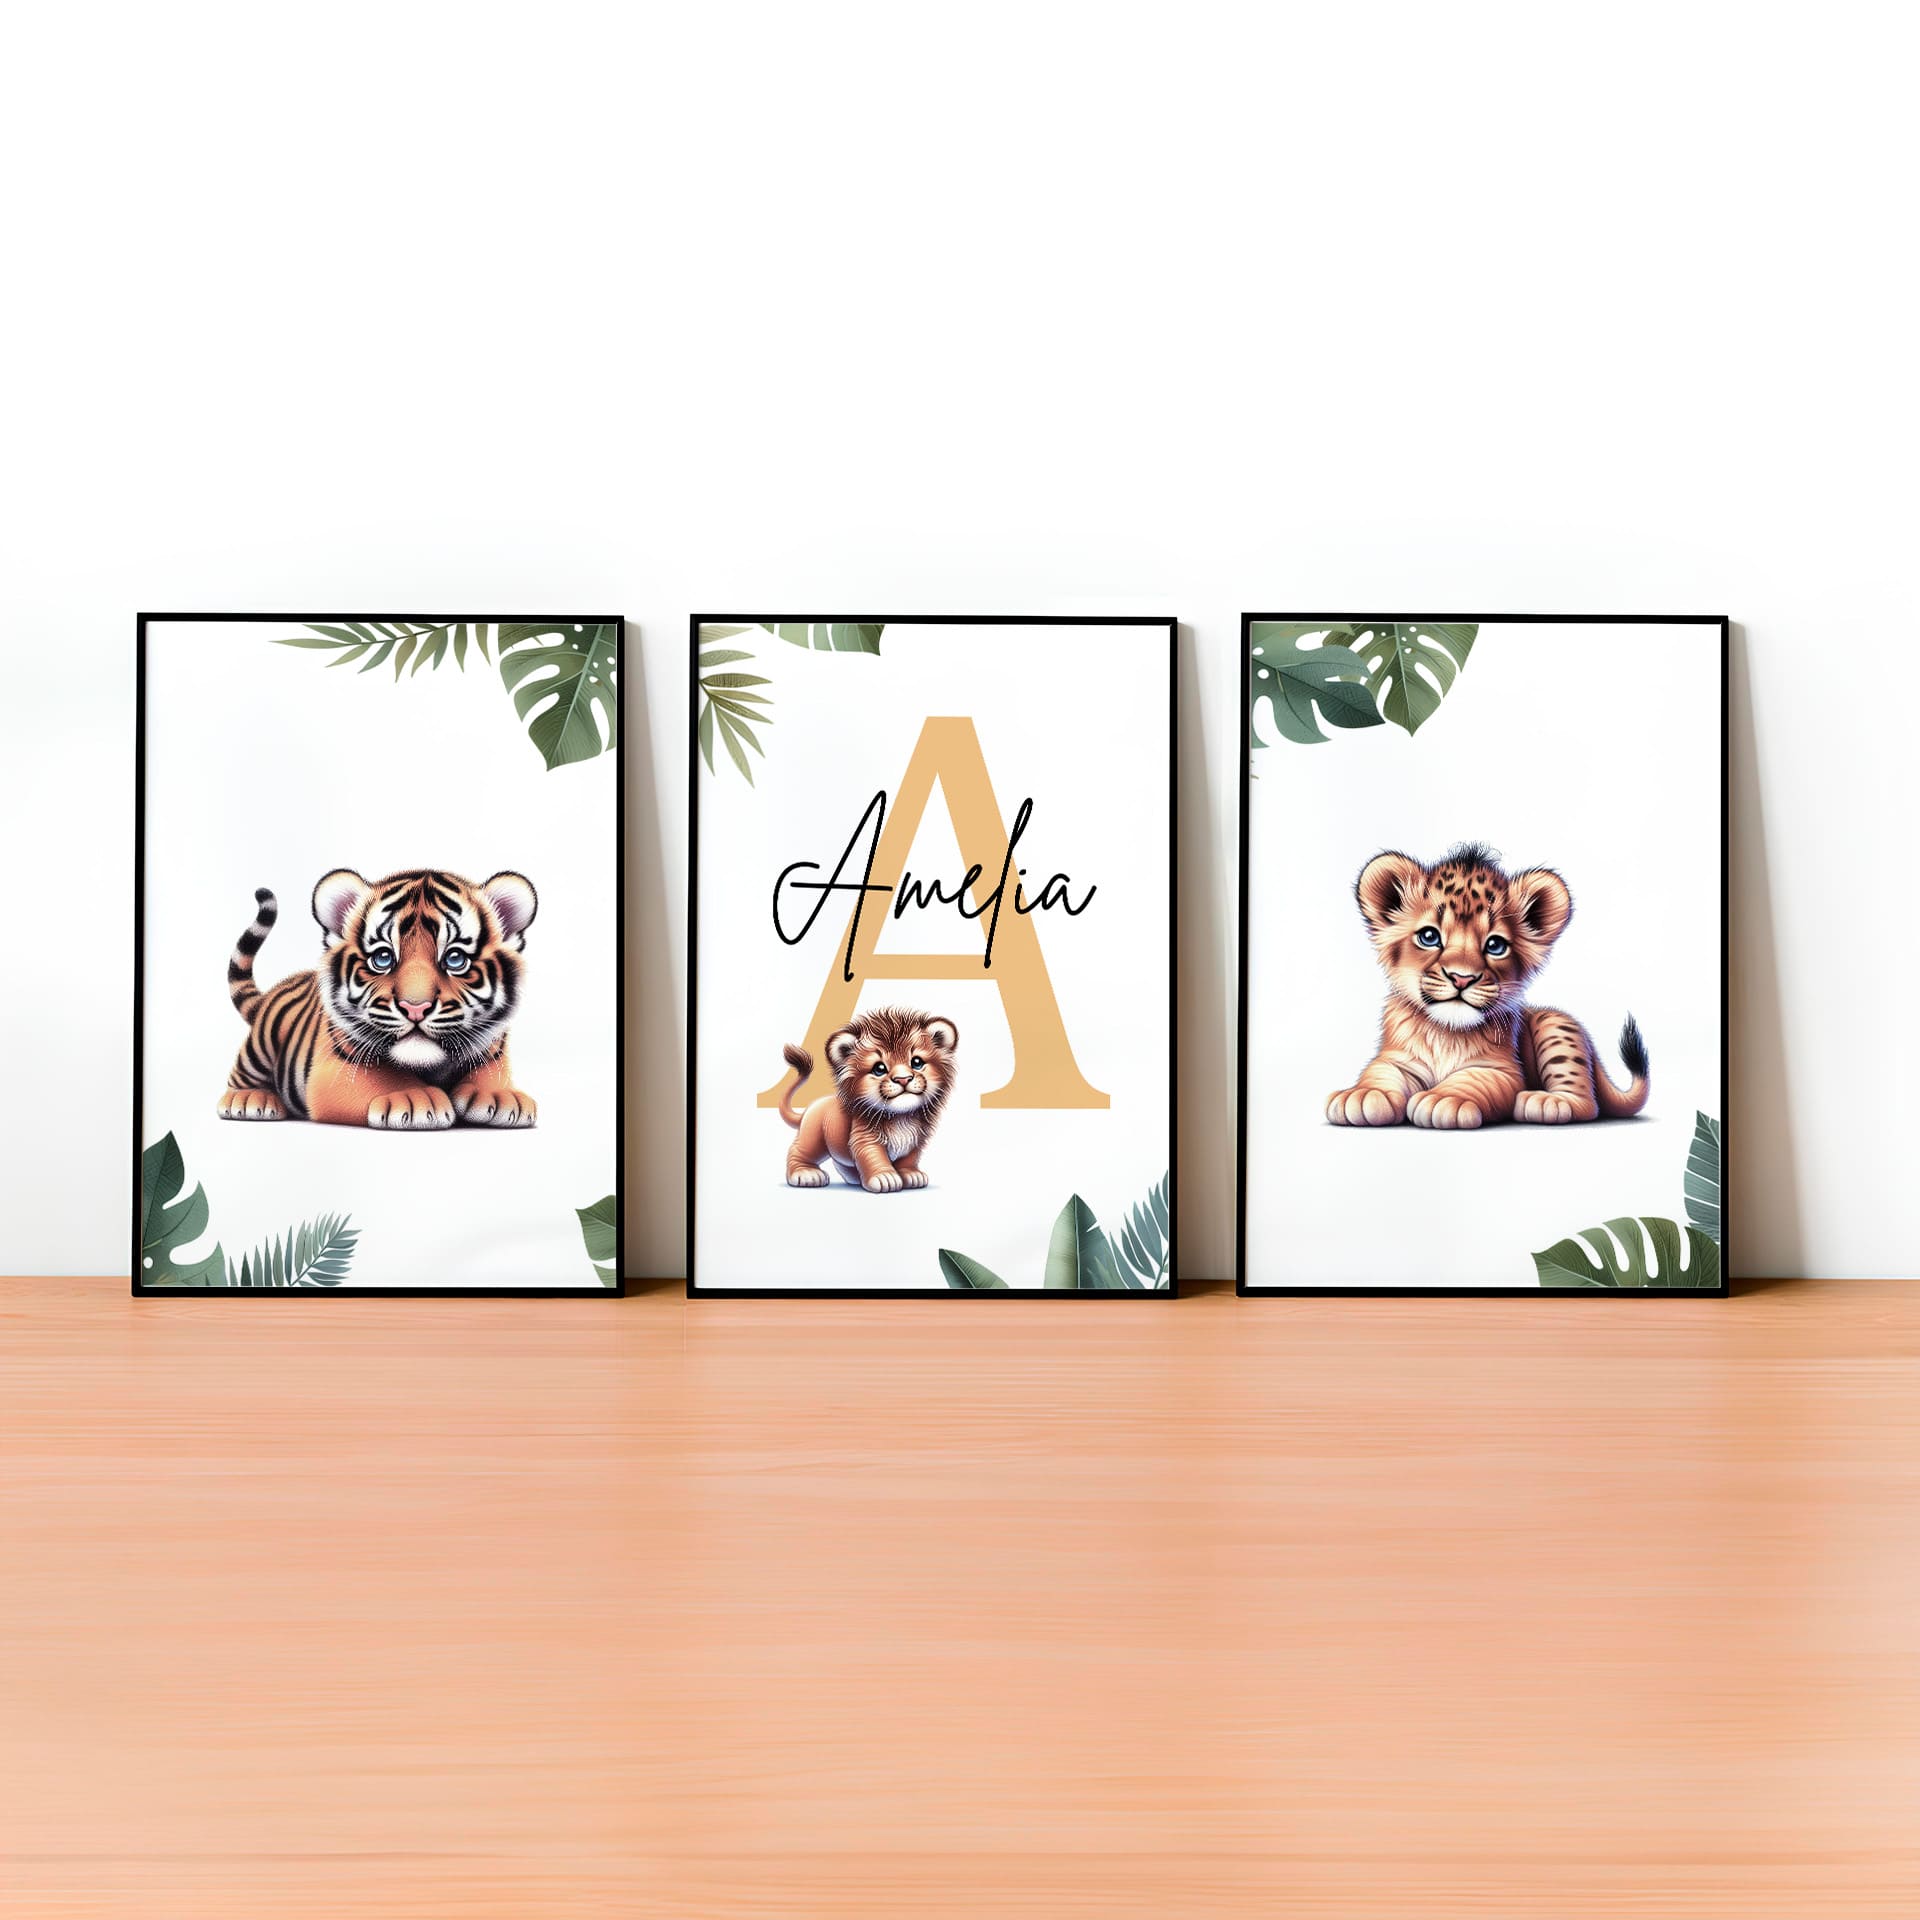 Set of three A4 prints featuring baby big cats - lion cub, tiger cub, and cheetah cub. The animals are depicted in a cartoony, bright style, resembling coloured pencil drawings. Jungle-style leaves adorn the edges of the prints. The middle print features a smaller animal compared to the others, with a large initial letter in the background. A personalised name in black overlays the initial letter.